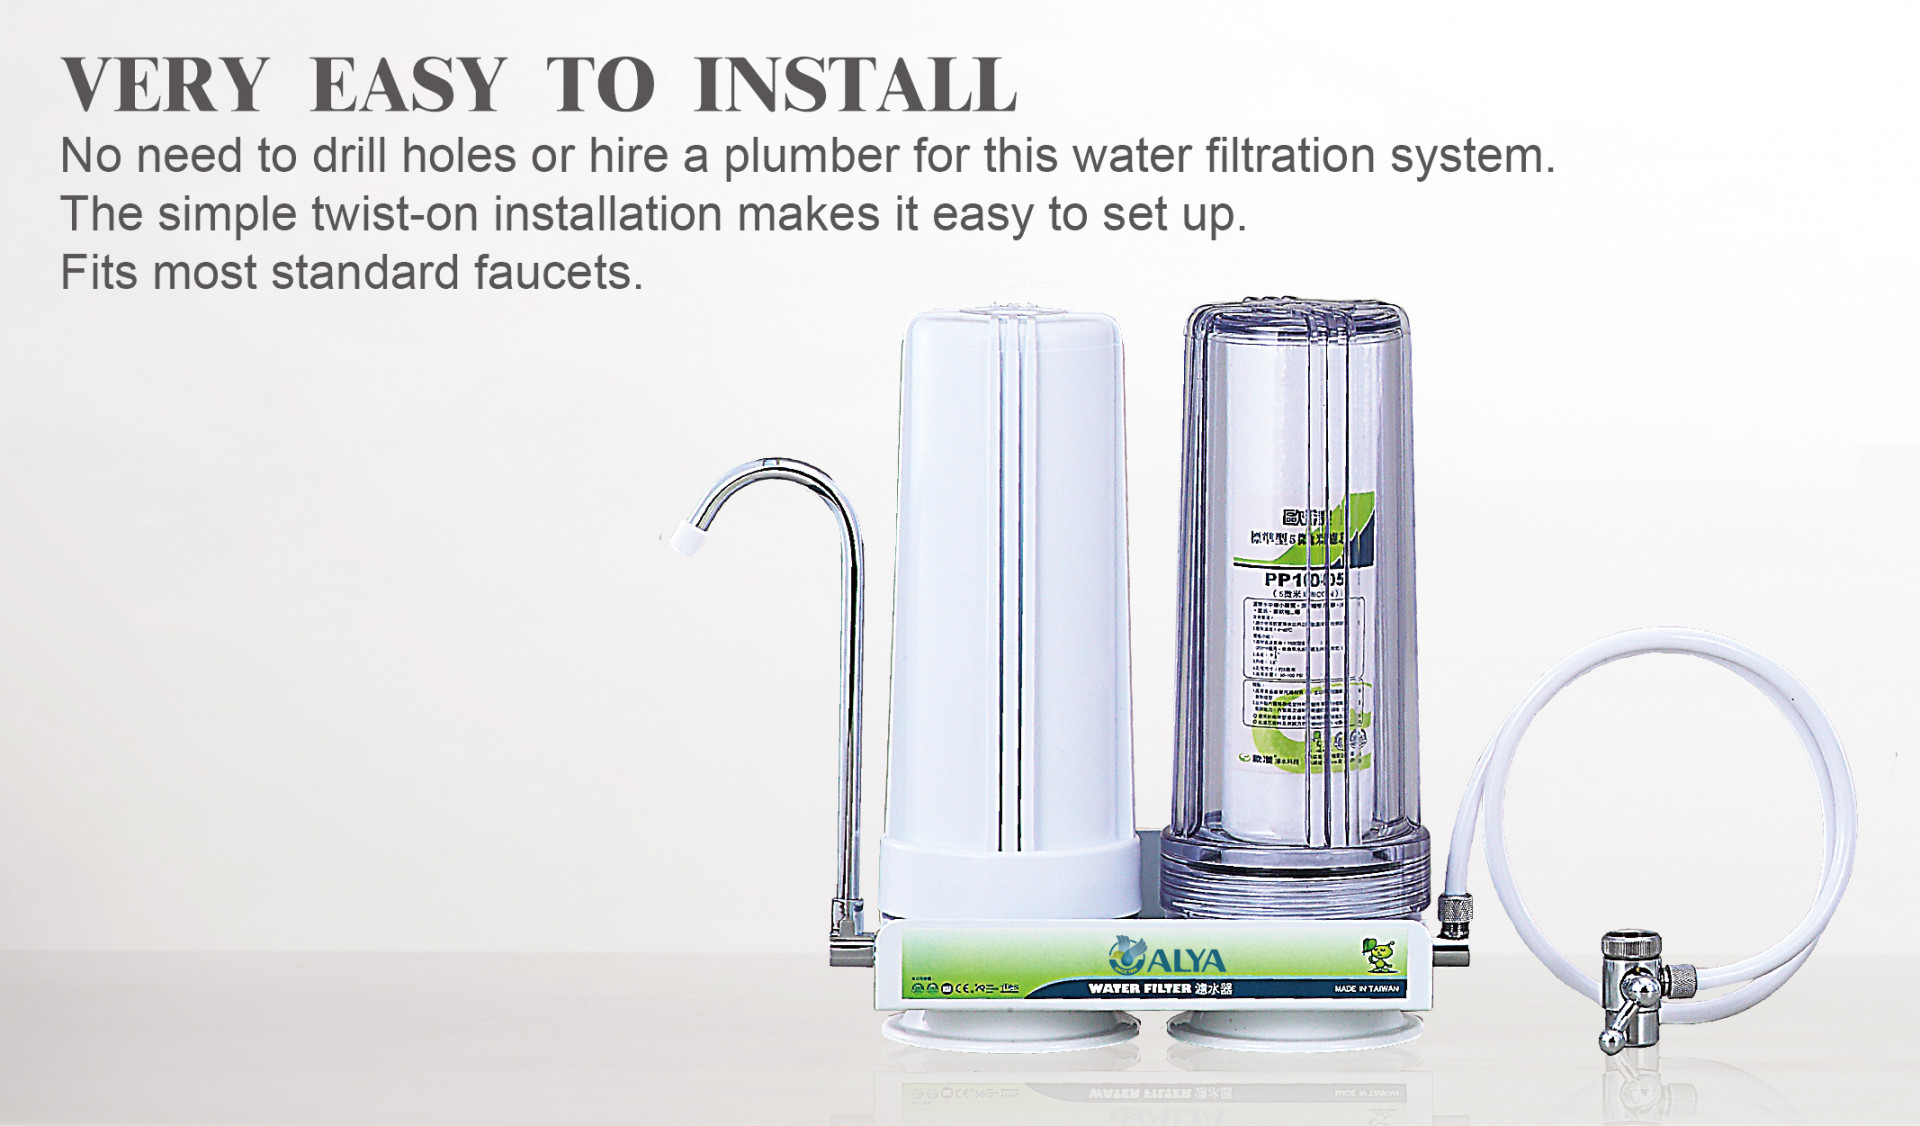 WATER PURIFIER VERY EASY TO INSTALL